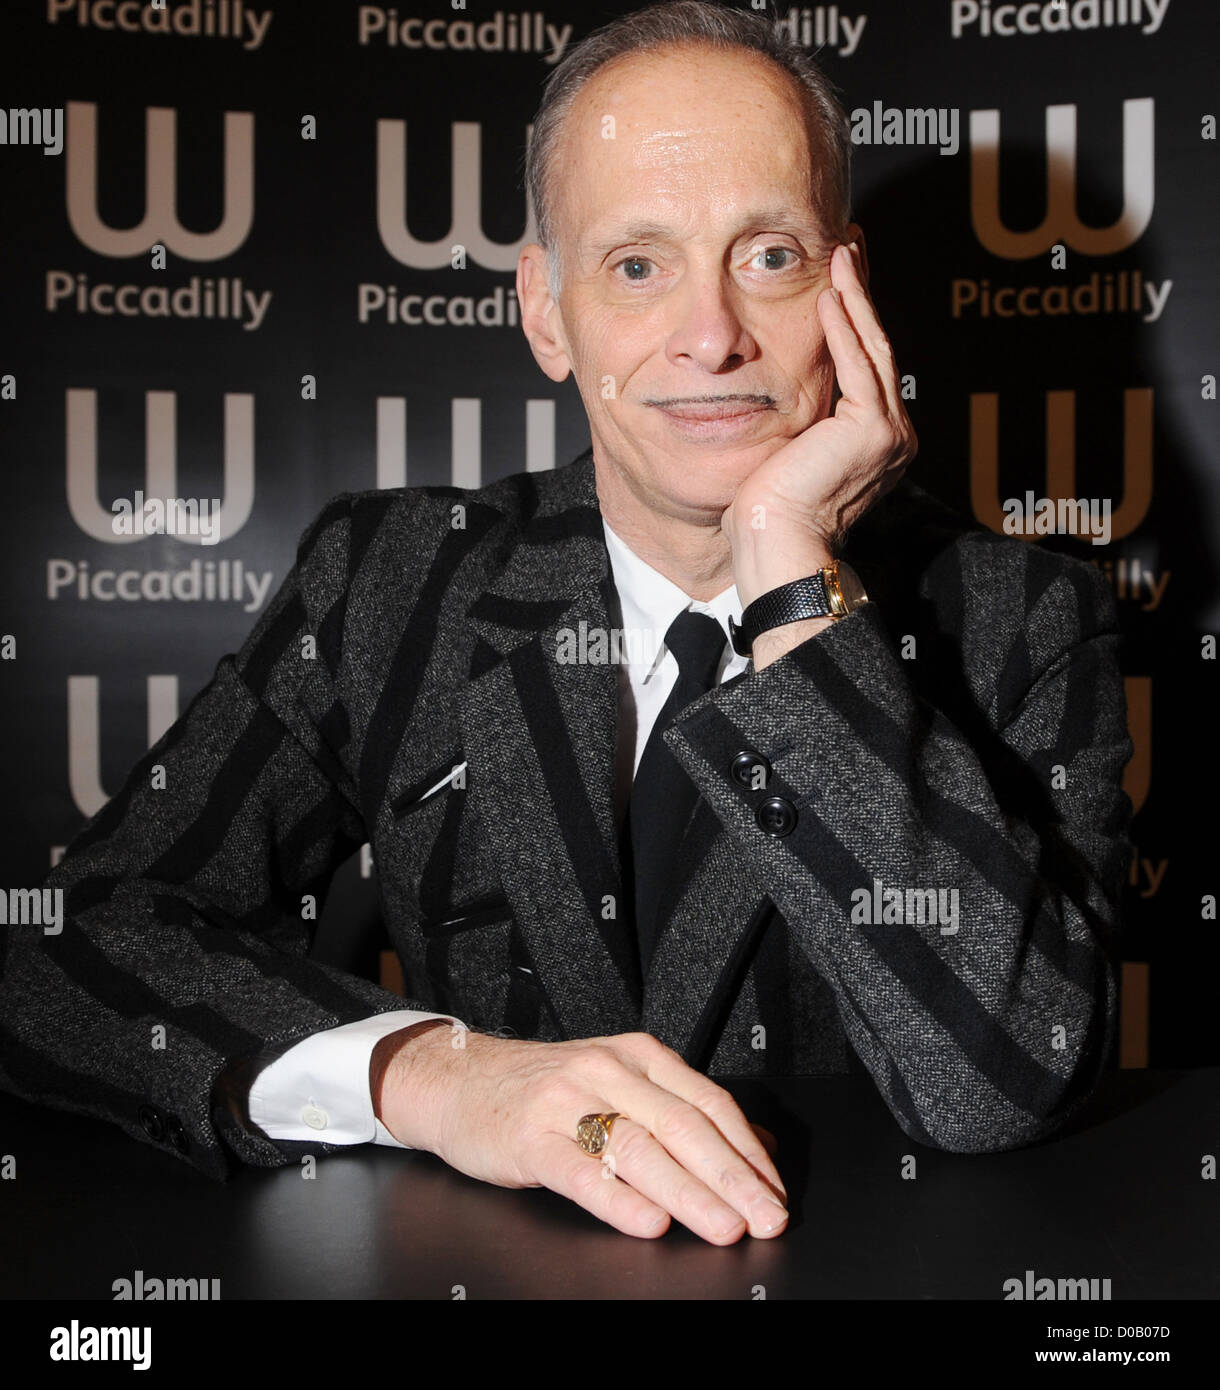 John Waters John Waters at a book signing for his new book 'Role Models' at Waterstones London, England - 04.12.10 Stock Photo